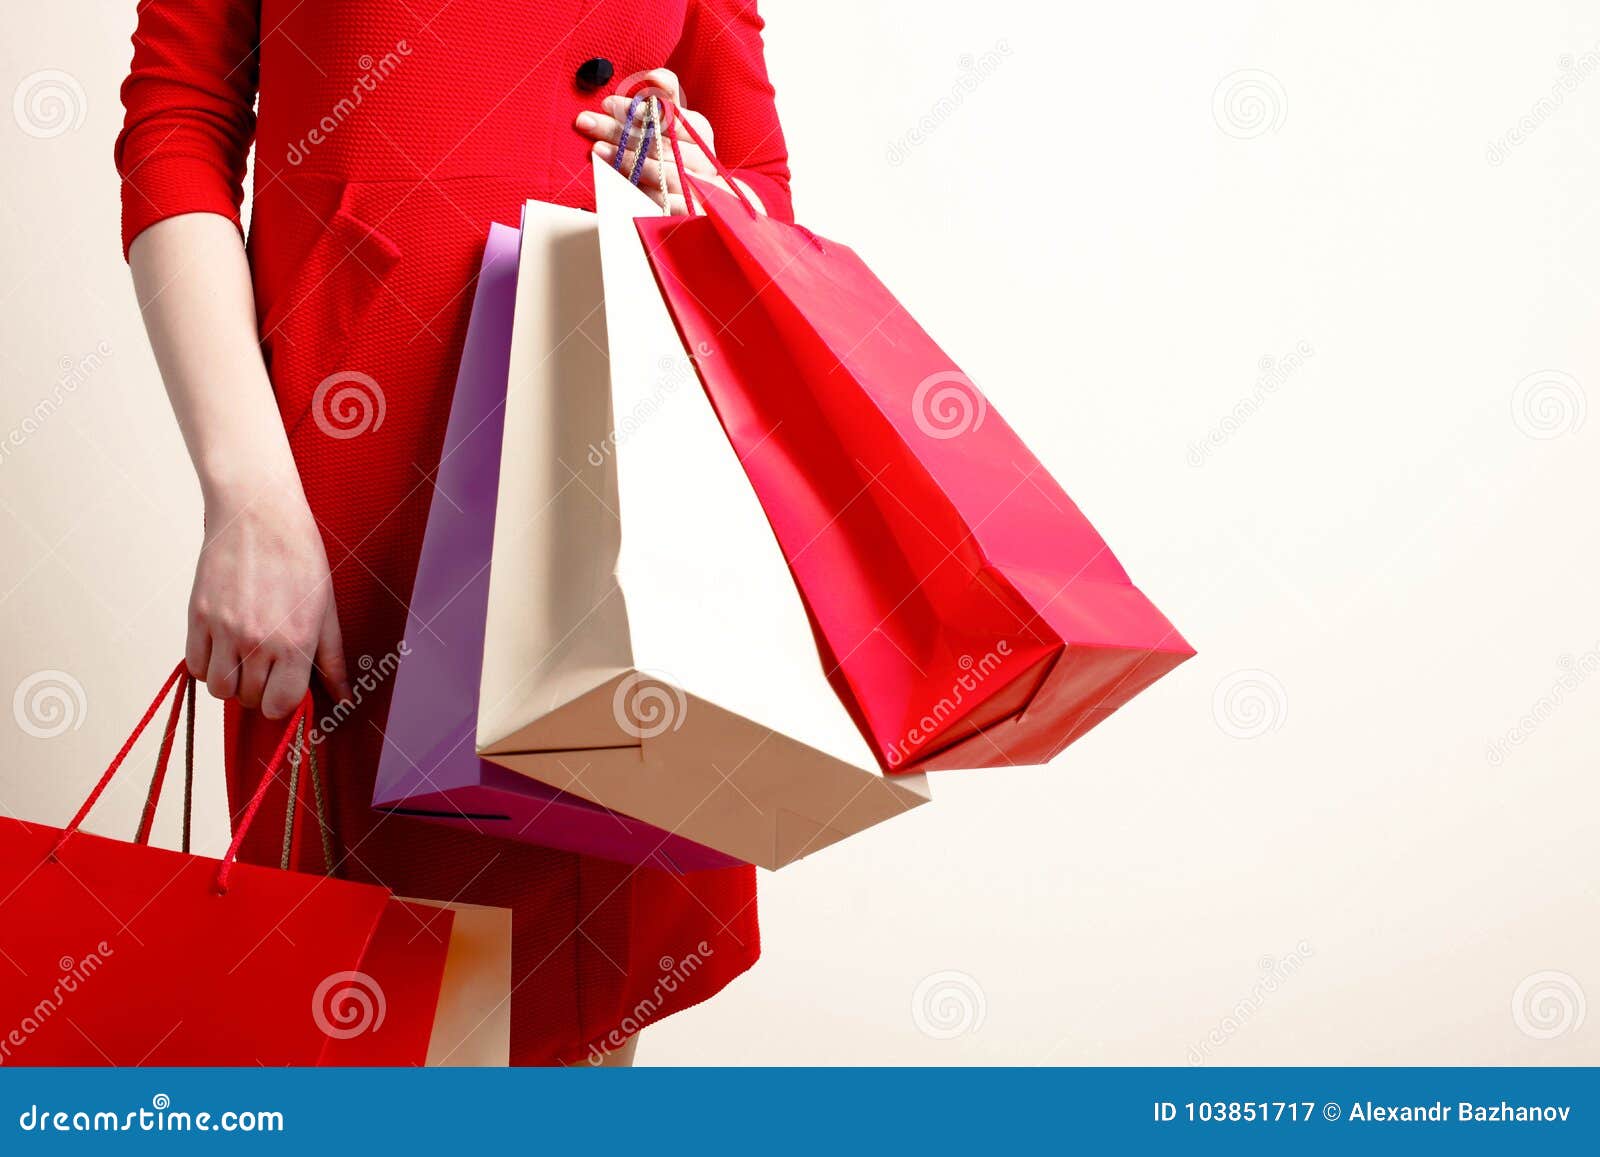 Girl in a red dress stock image. Image of friday, package - 103851717